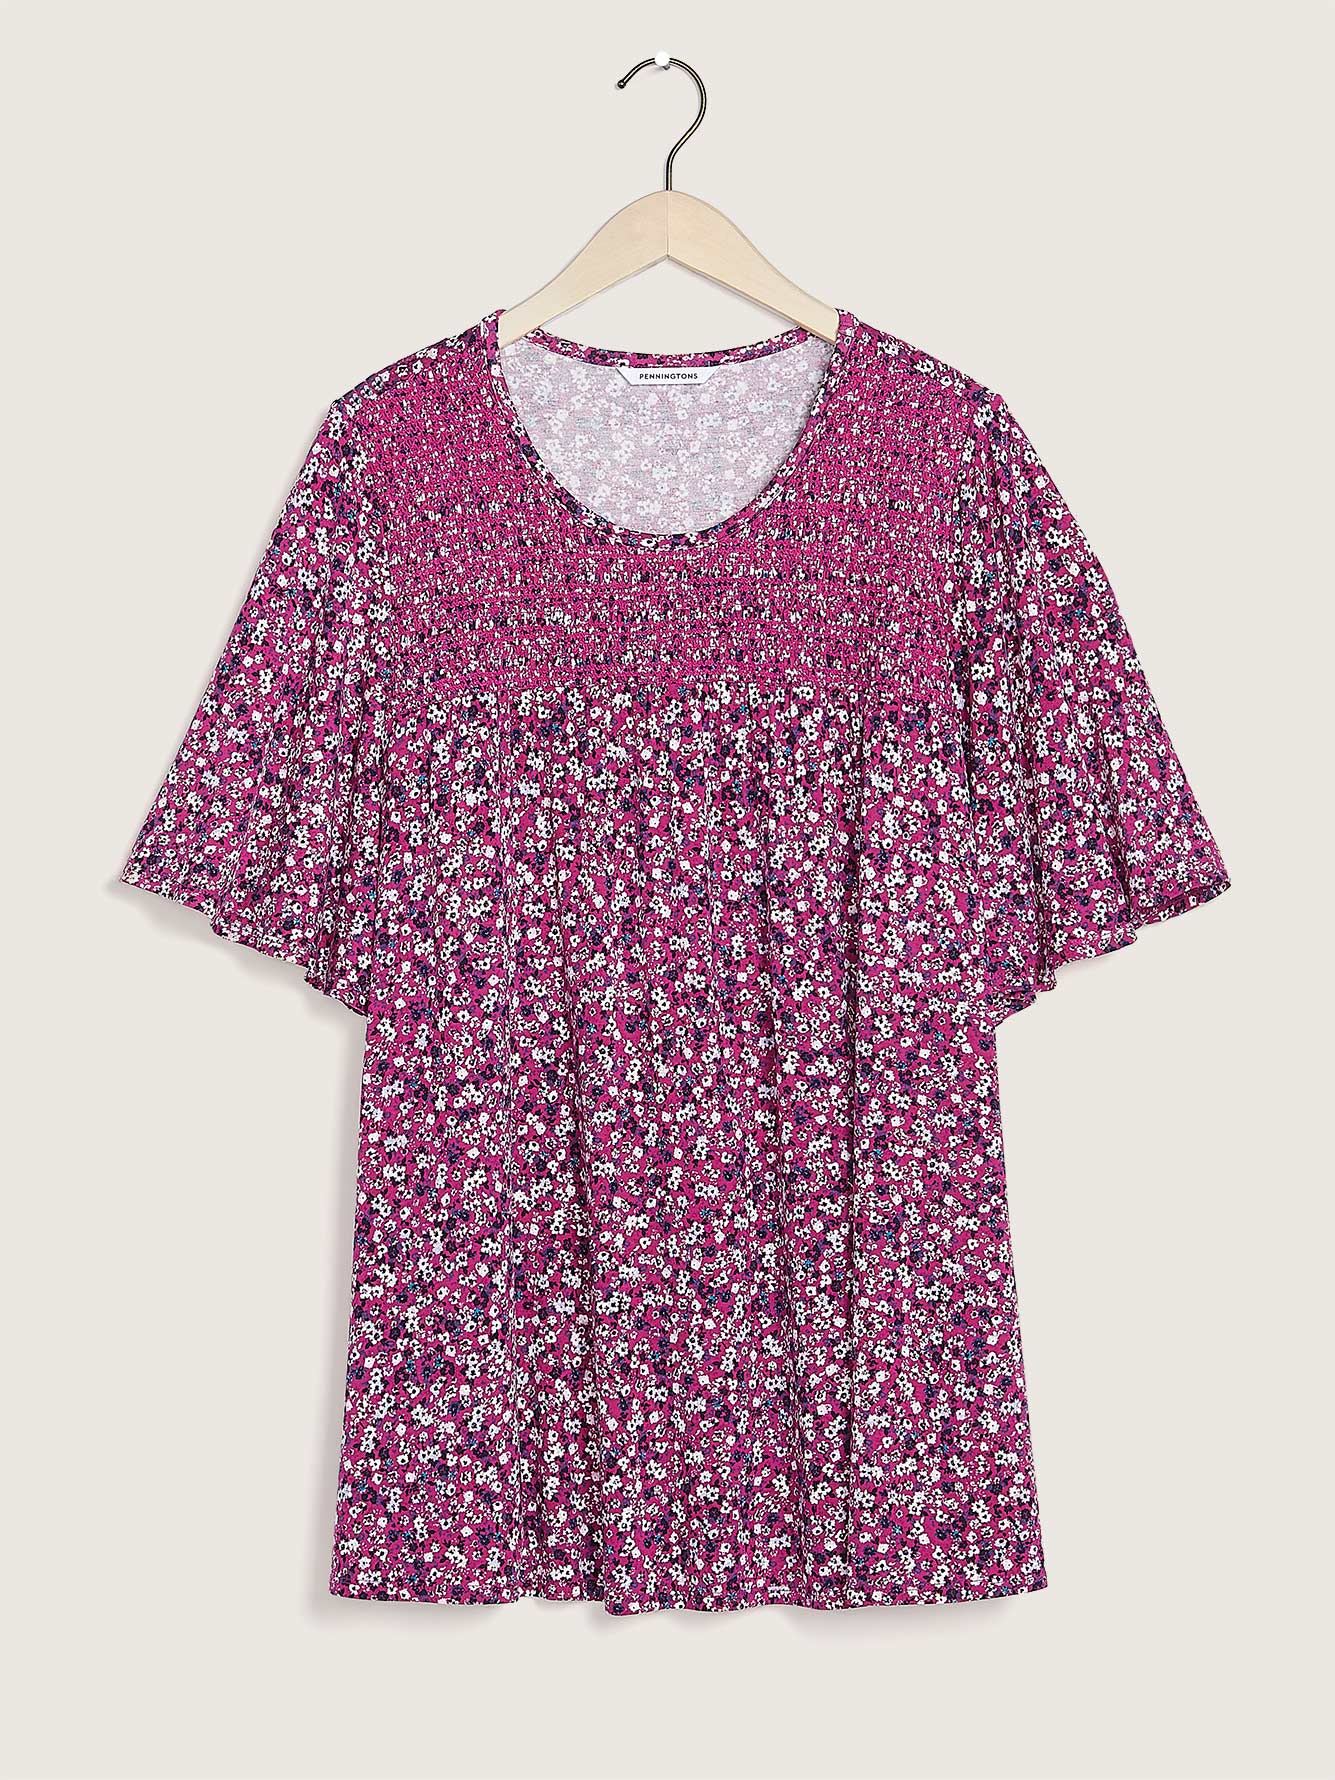 Responsible, Printed Tunic With Flutter Sleeve - In Every Story